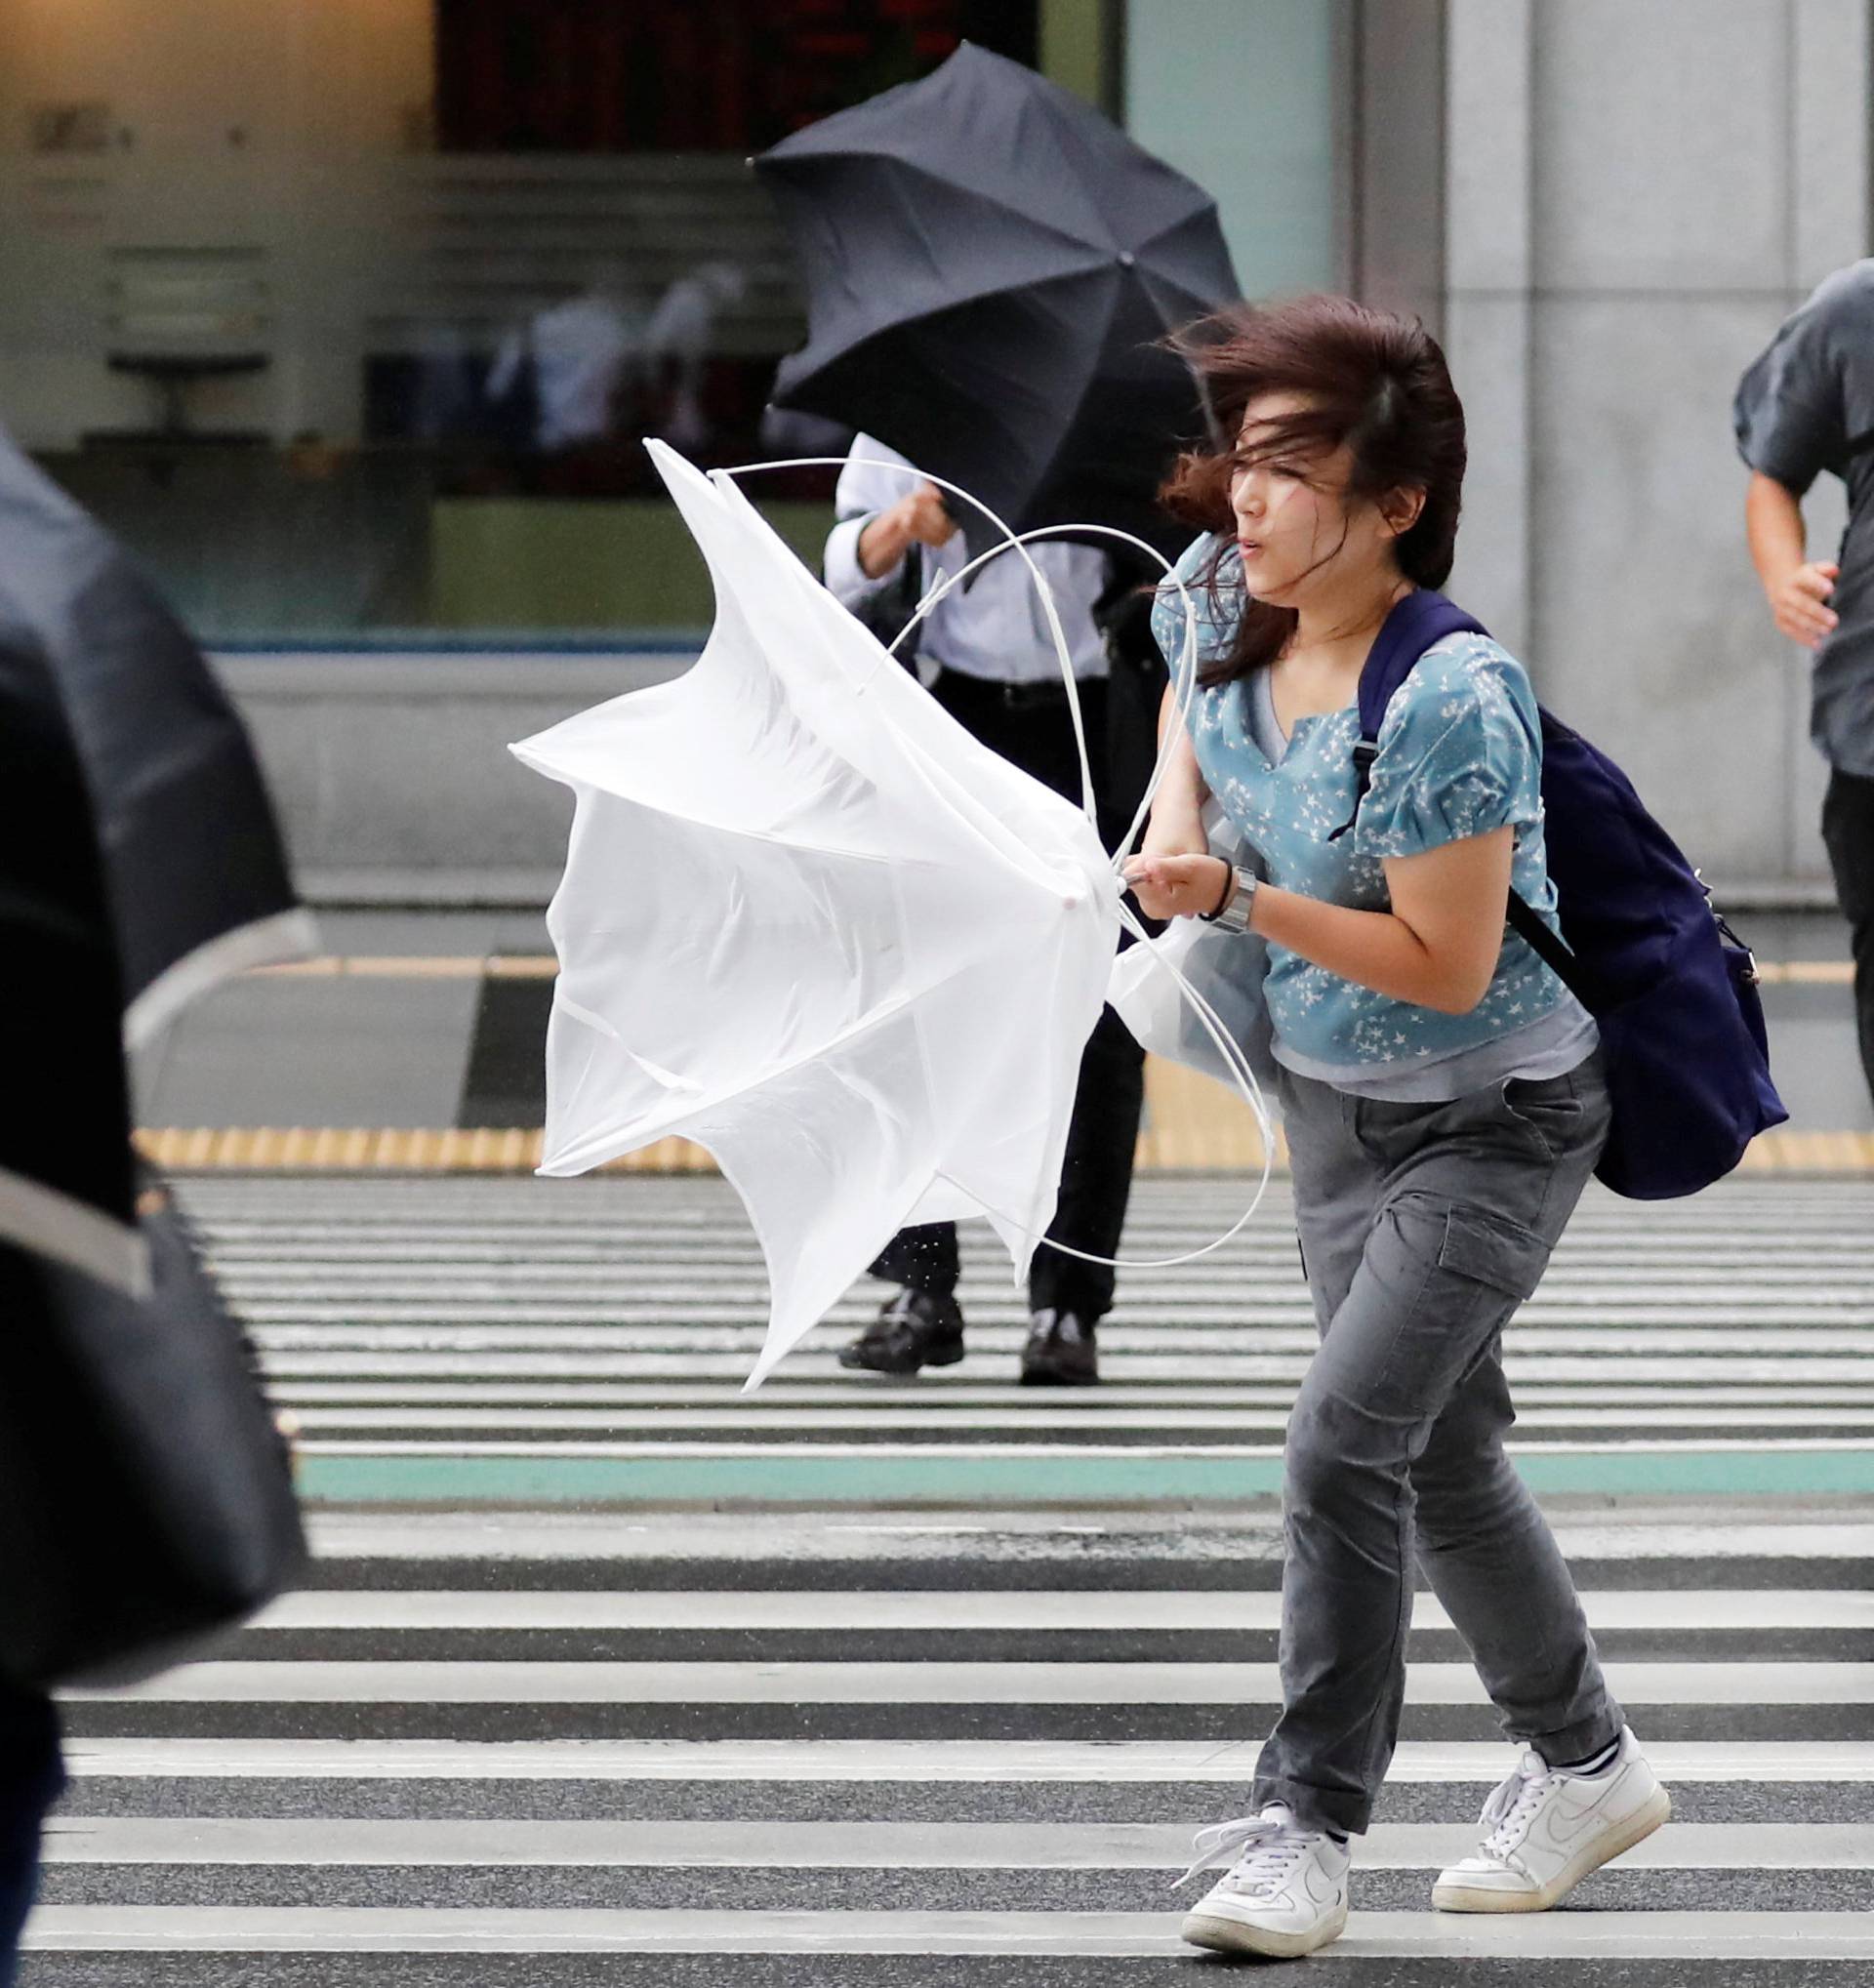 Passersby using umbrellas struggle against strong wind and rain caused by Typhoon Jebi, in Tokyo